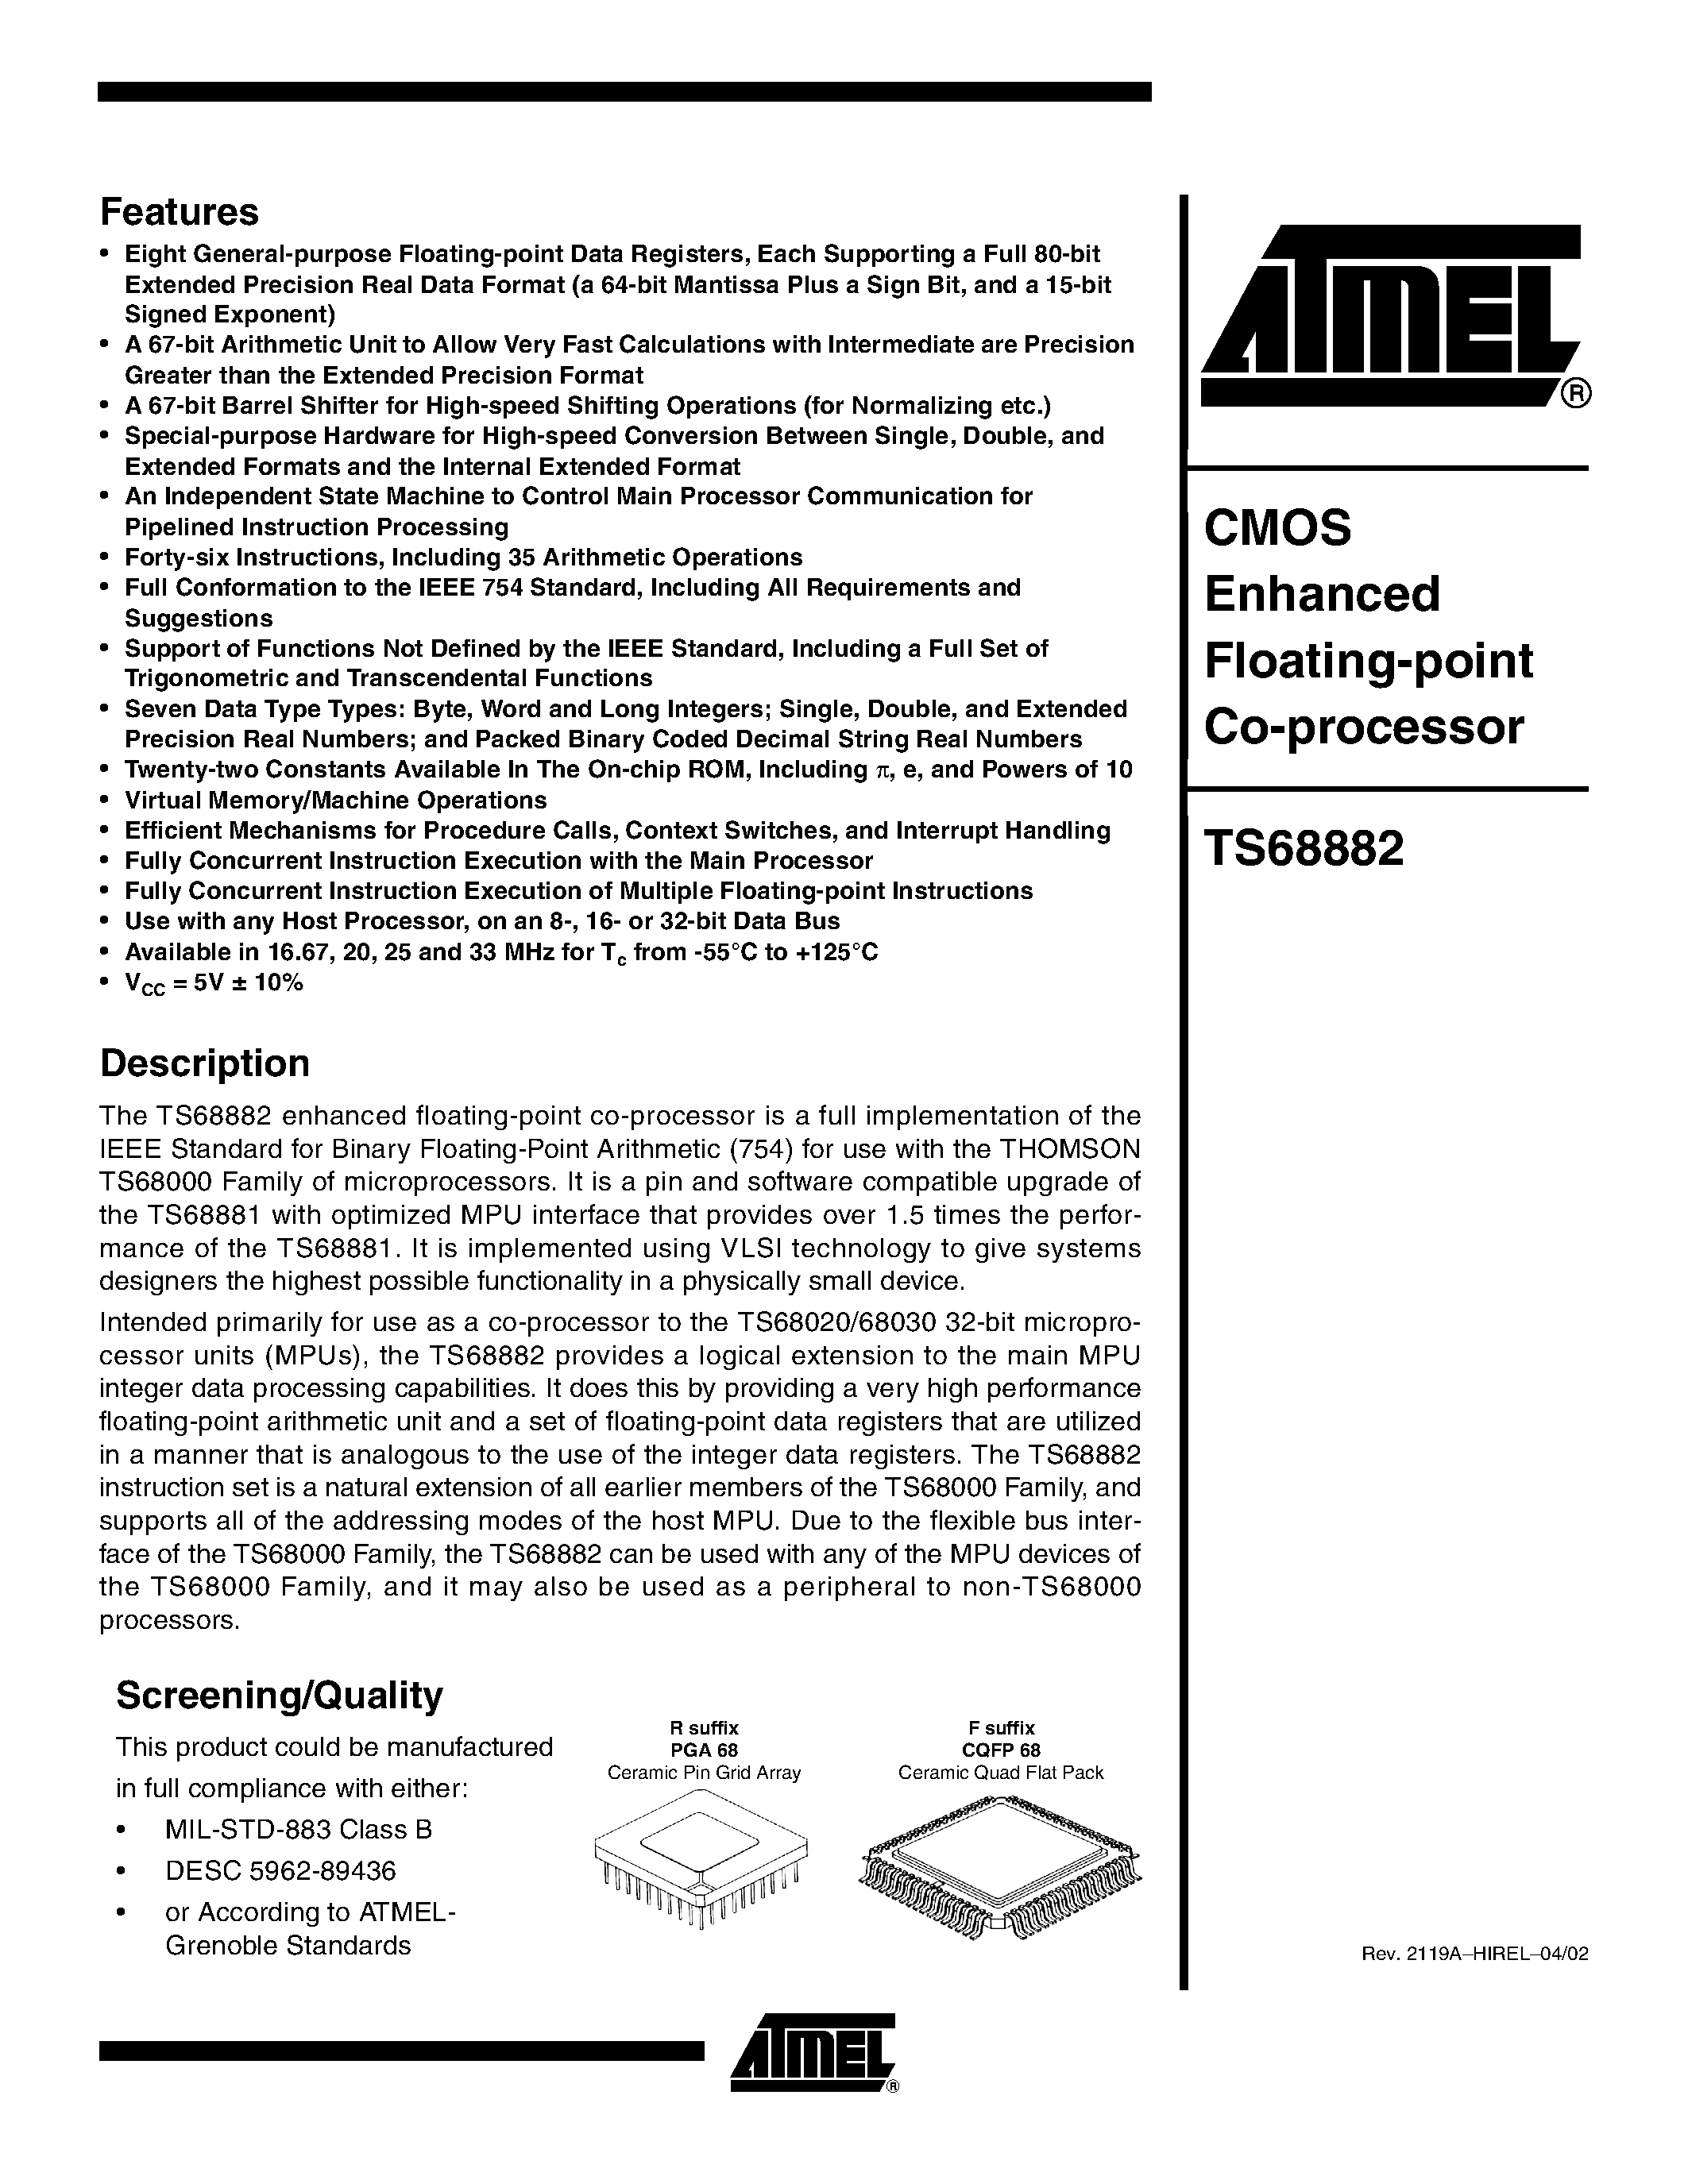 Datasheet TS68882VR33 - CMOS Enhanced Floating-point Co-processor page 1